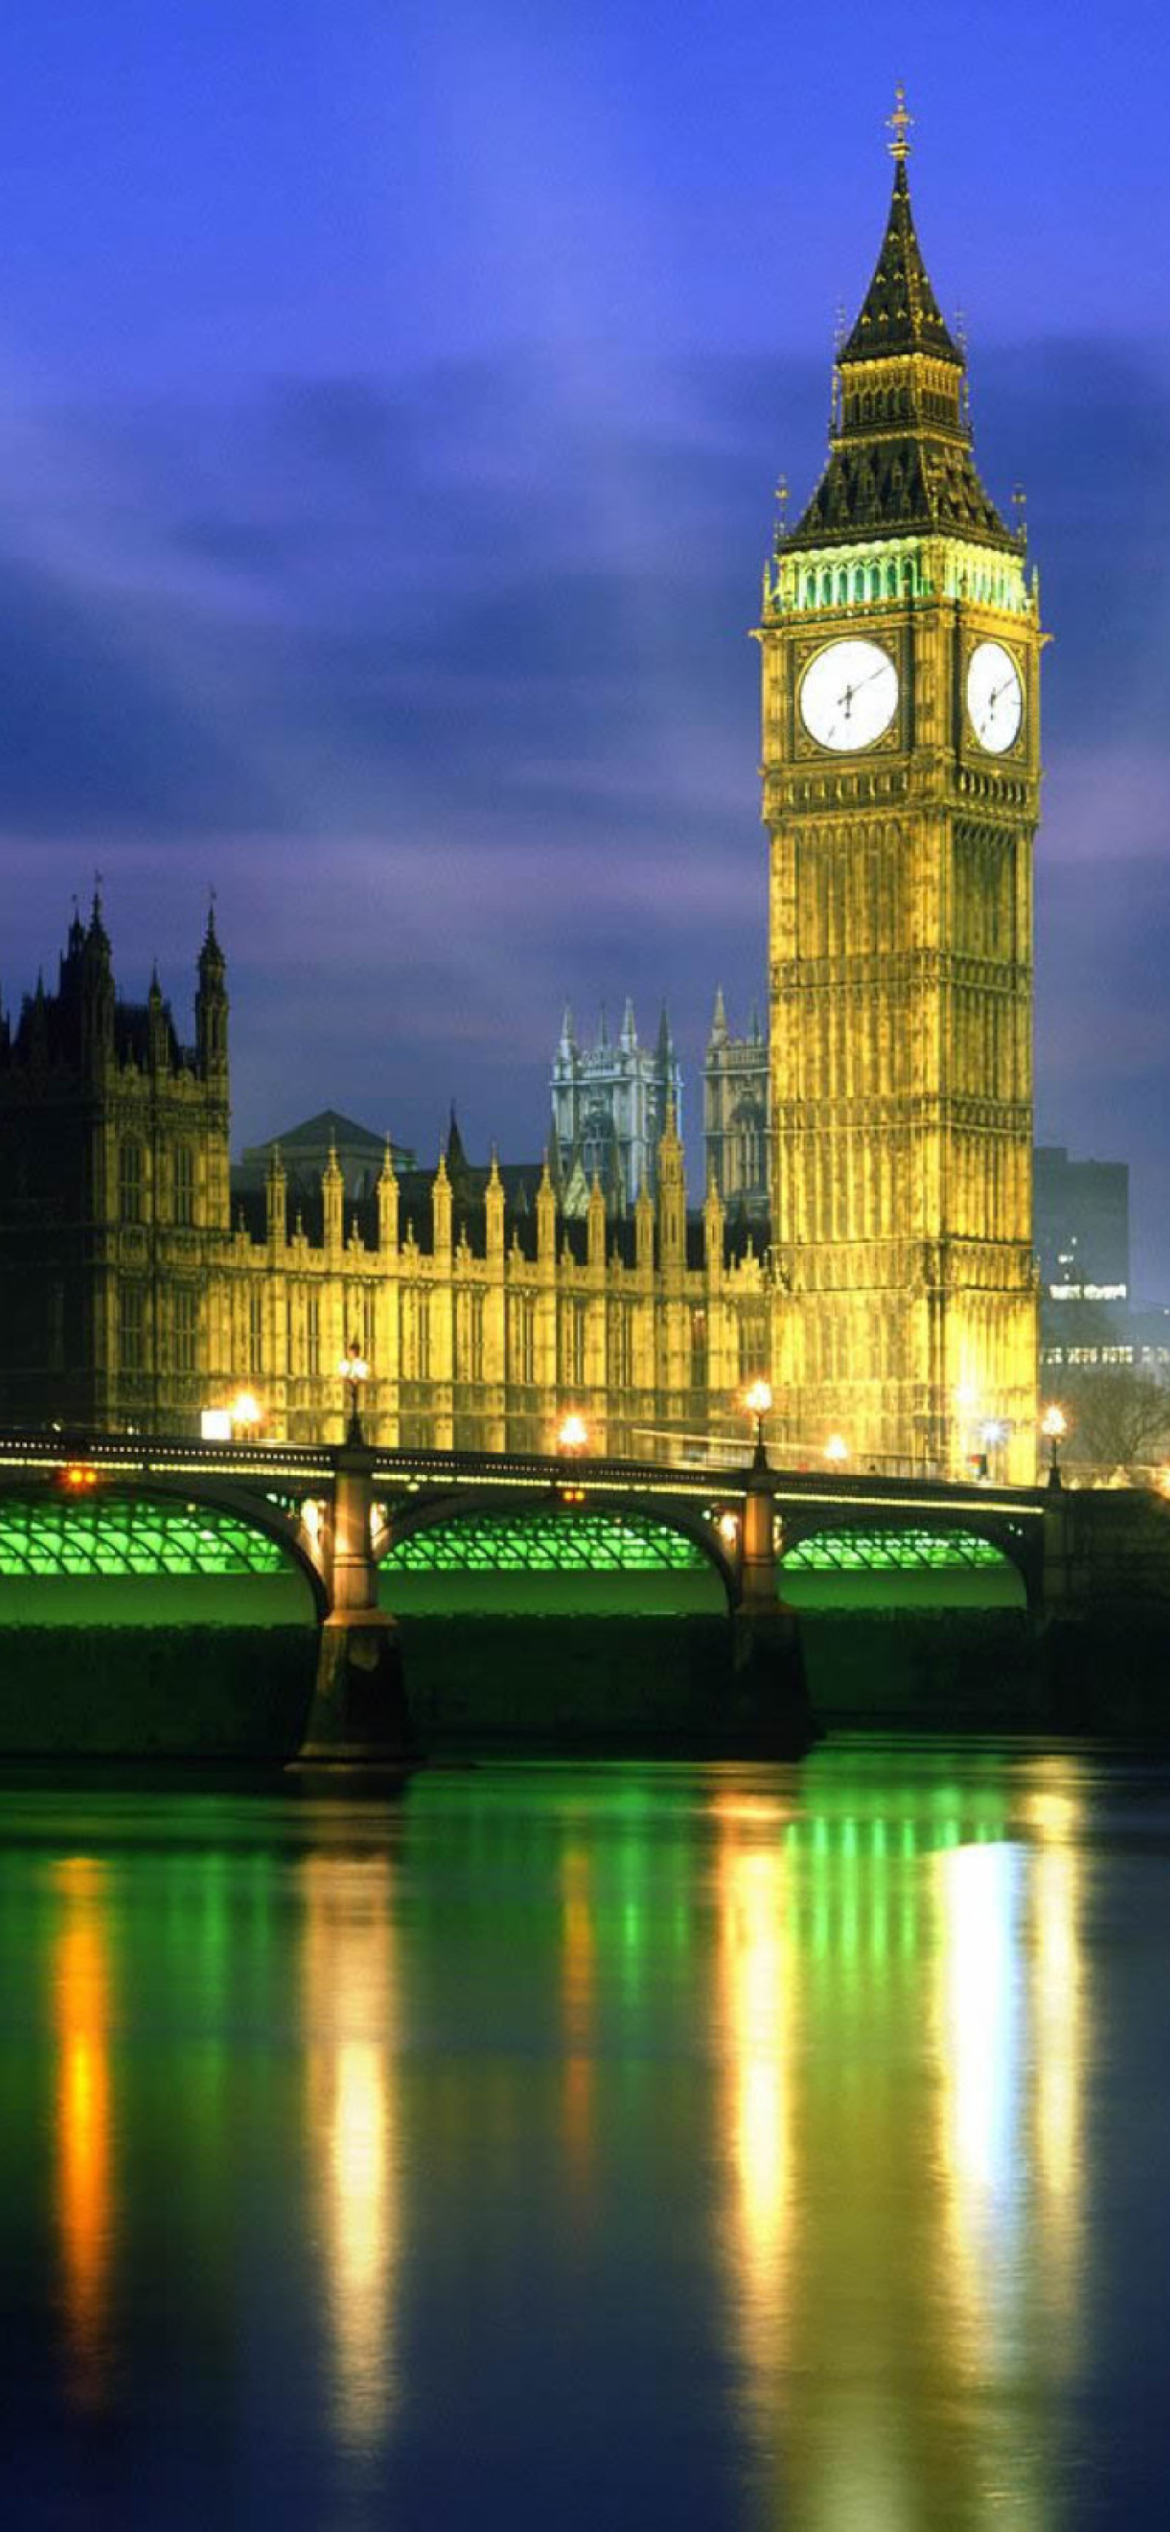 Palace Of Westminster At Night wallpaper 1170x2532